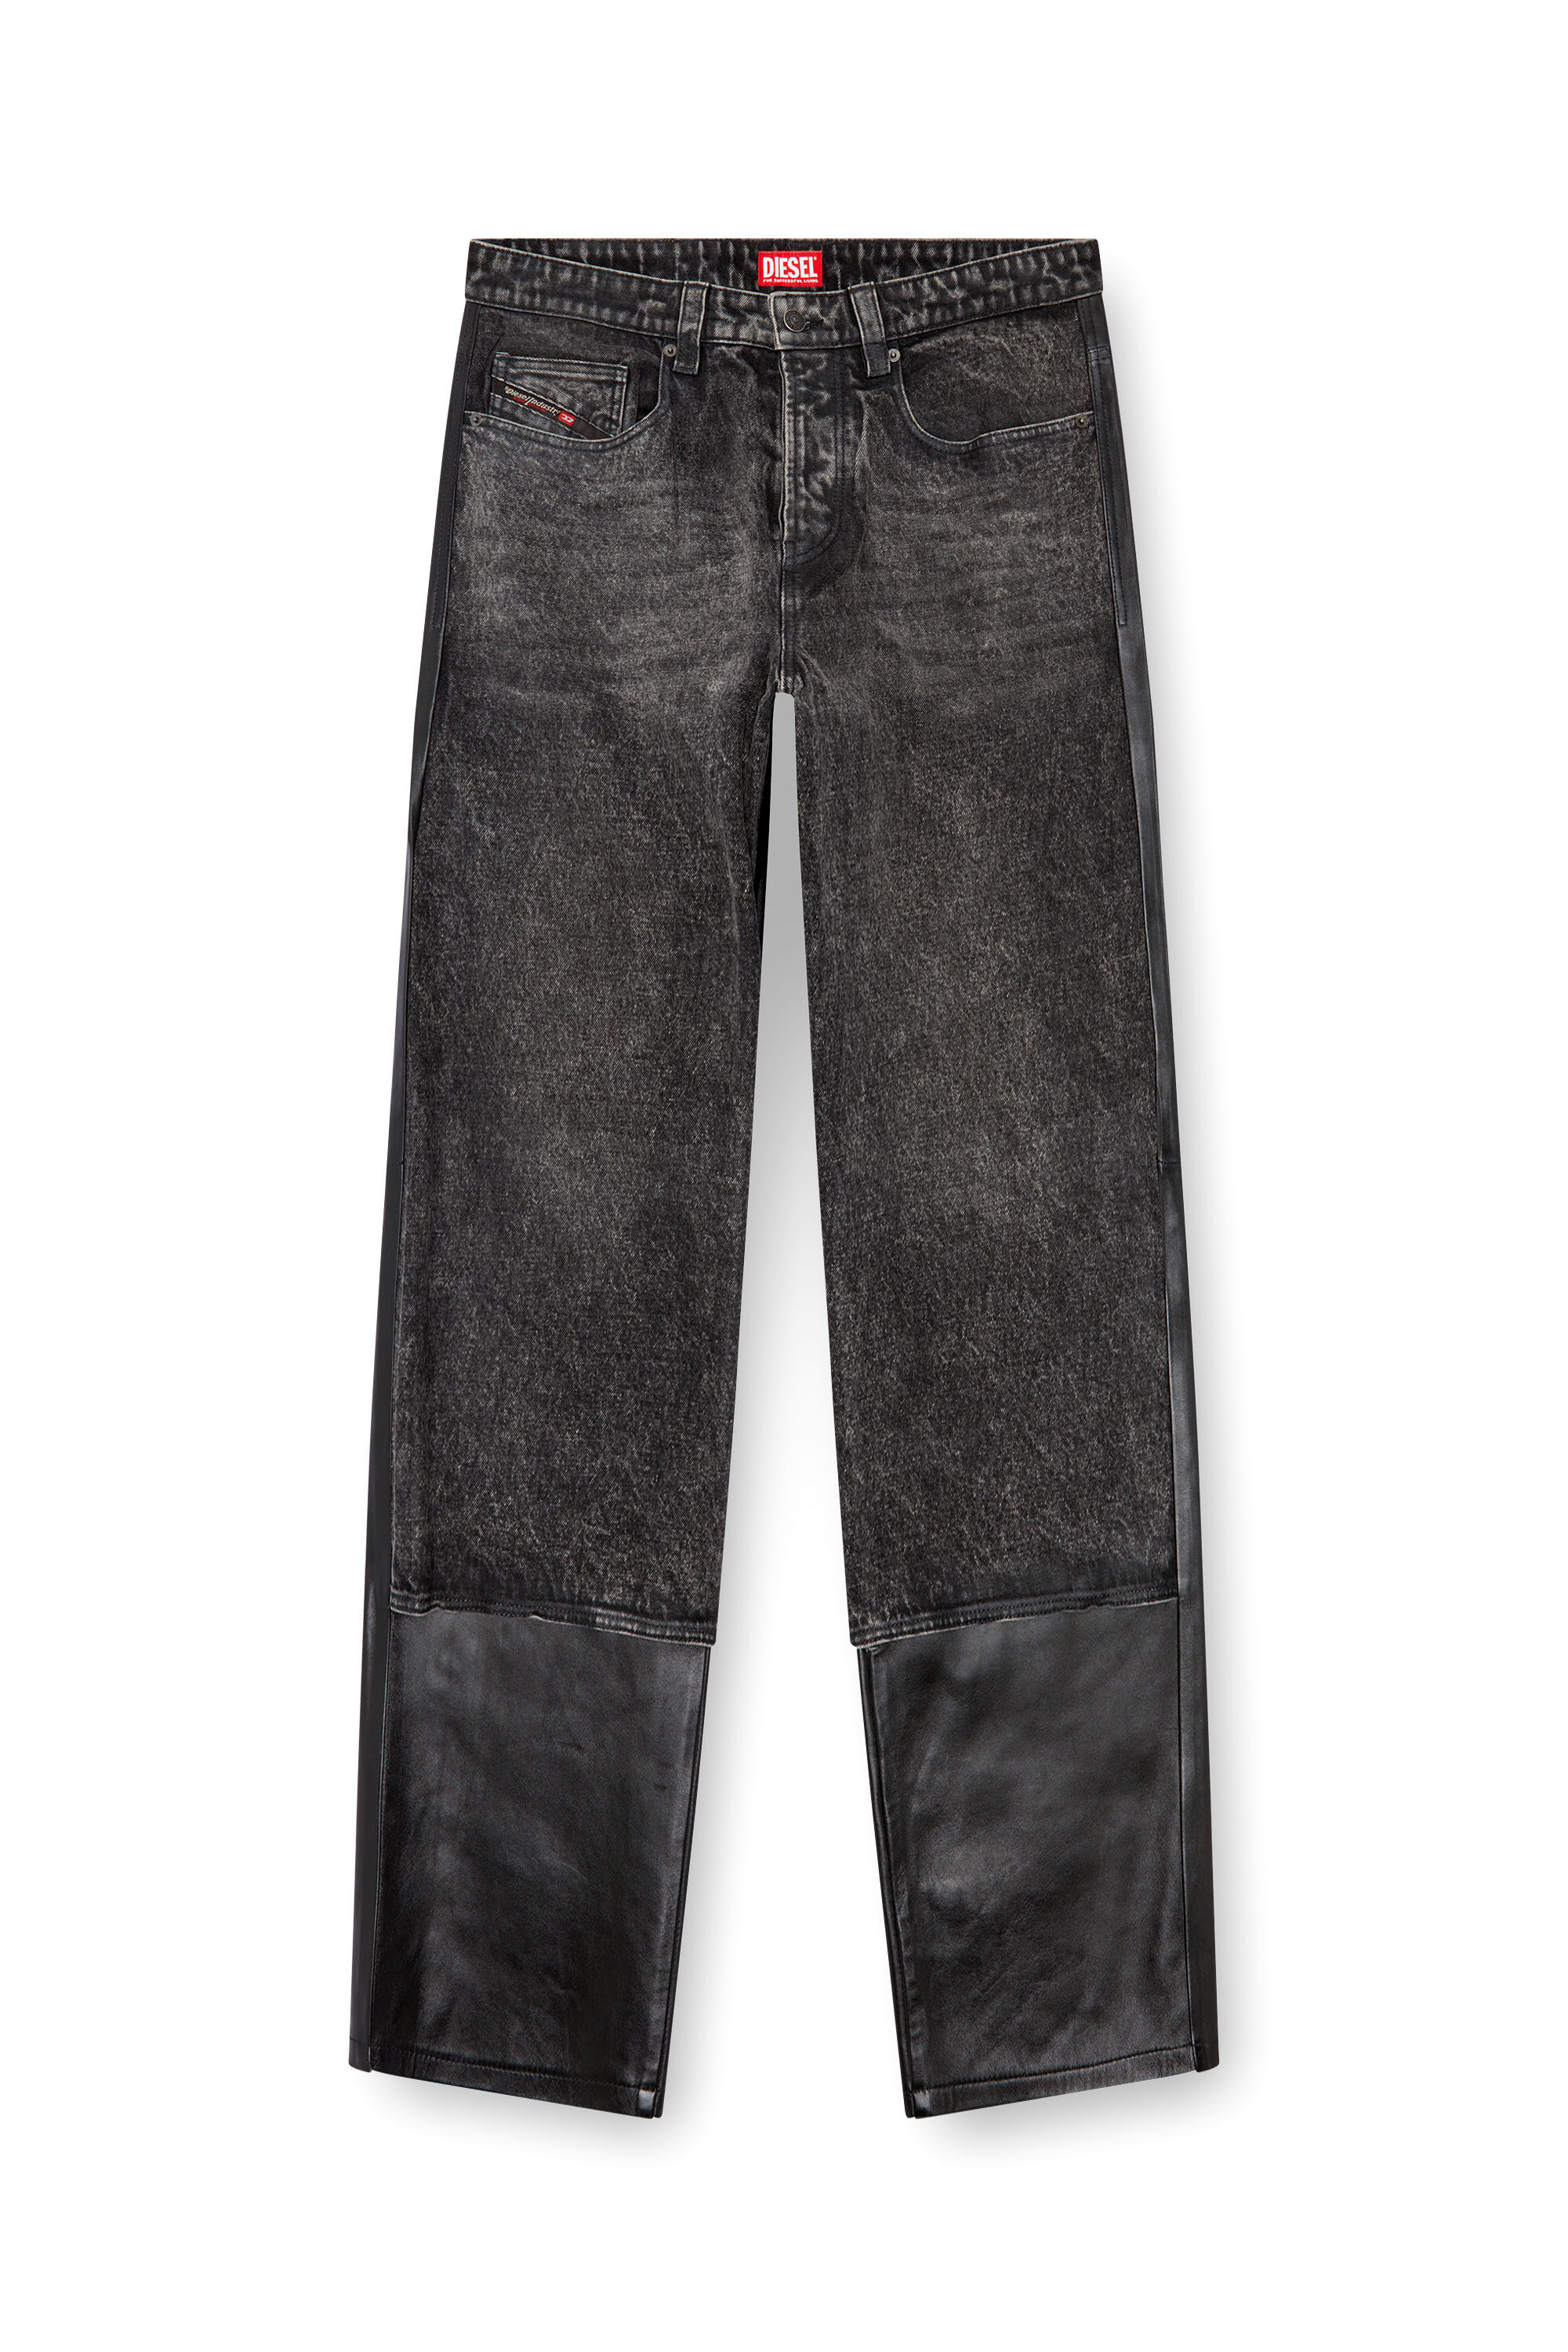 Diesel - P-BRETCH, Male Leather and denim pants in ブラック - Image 5